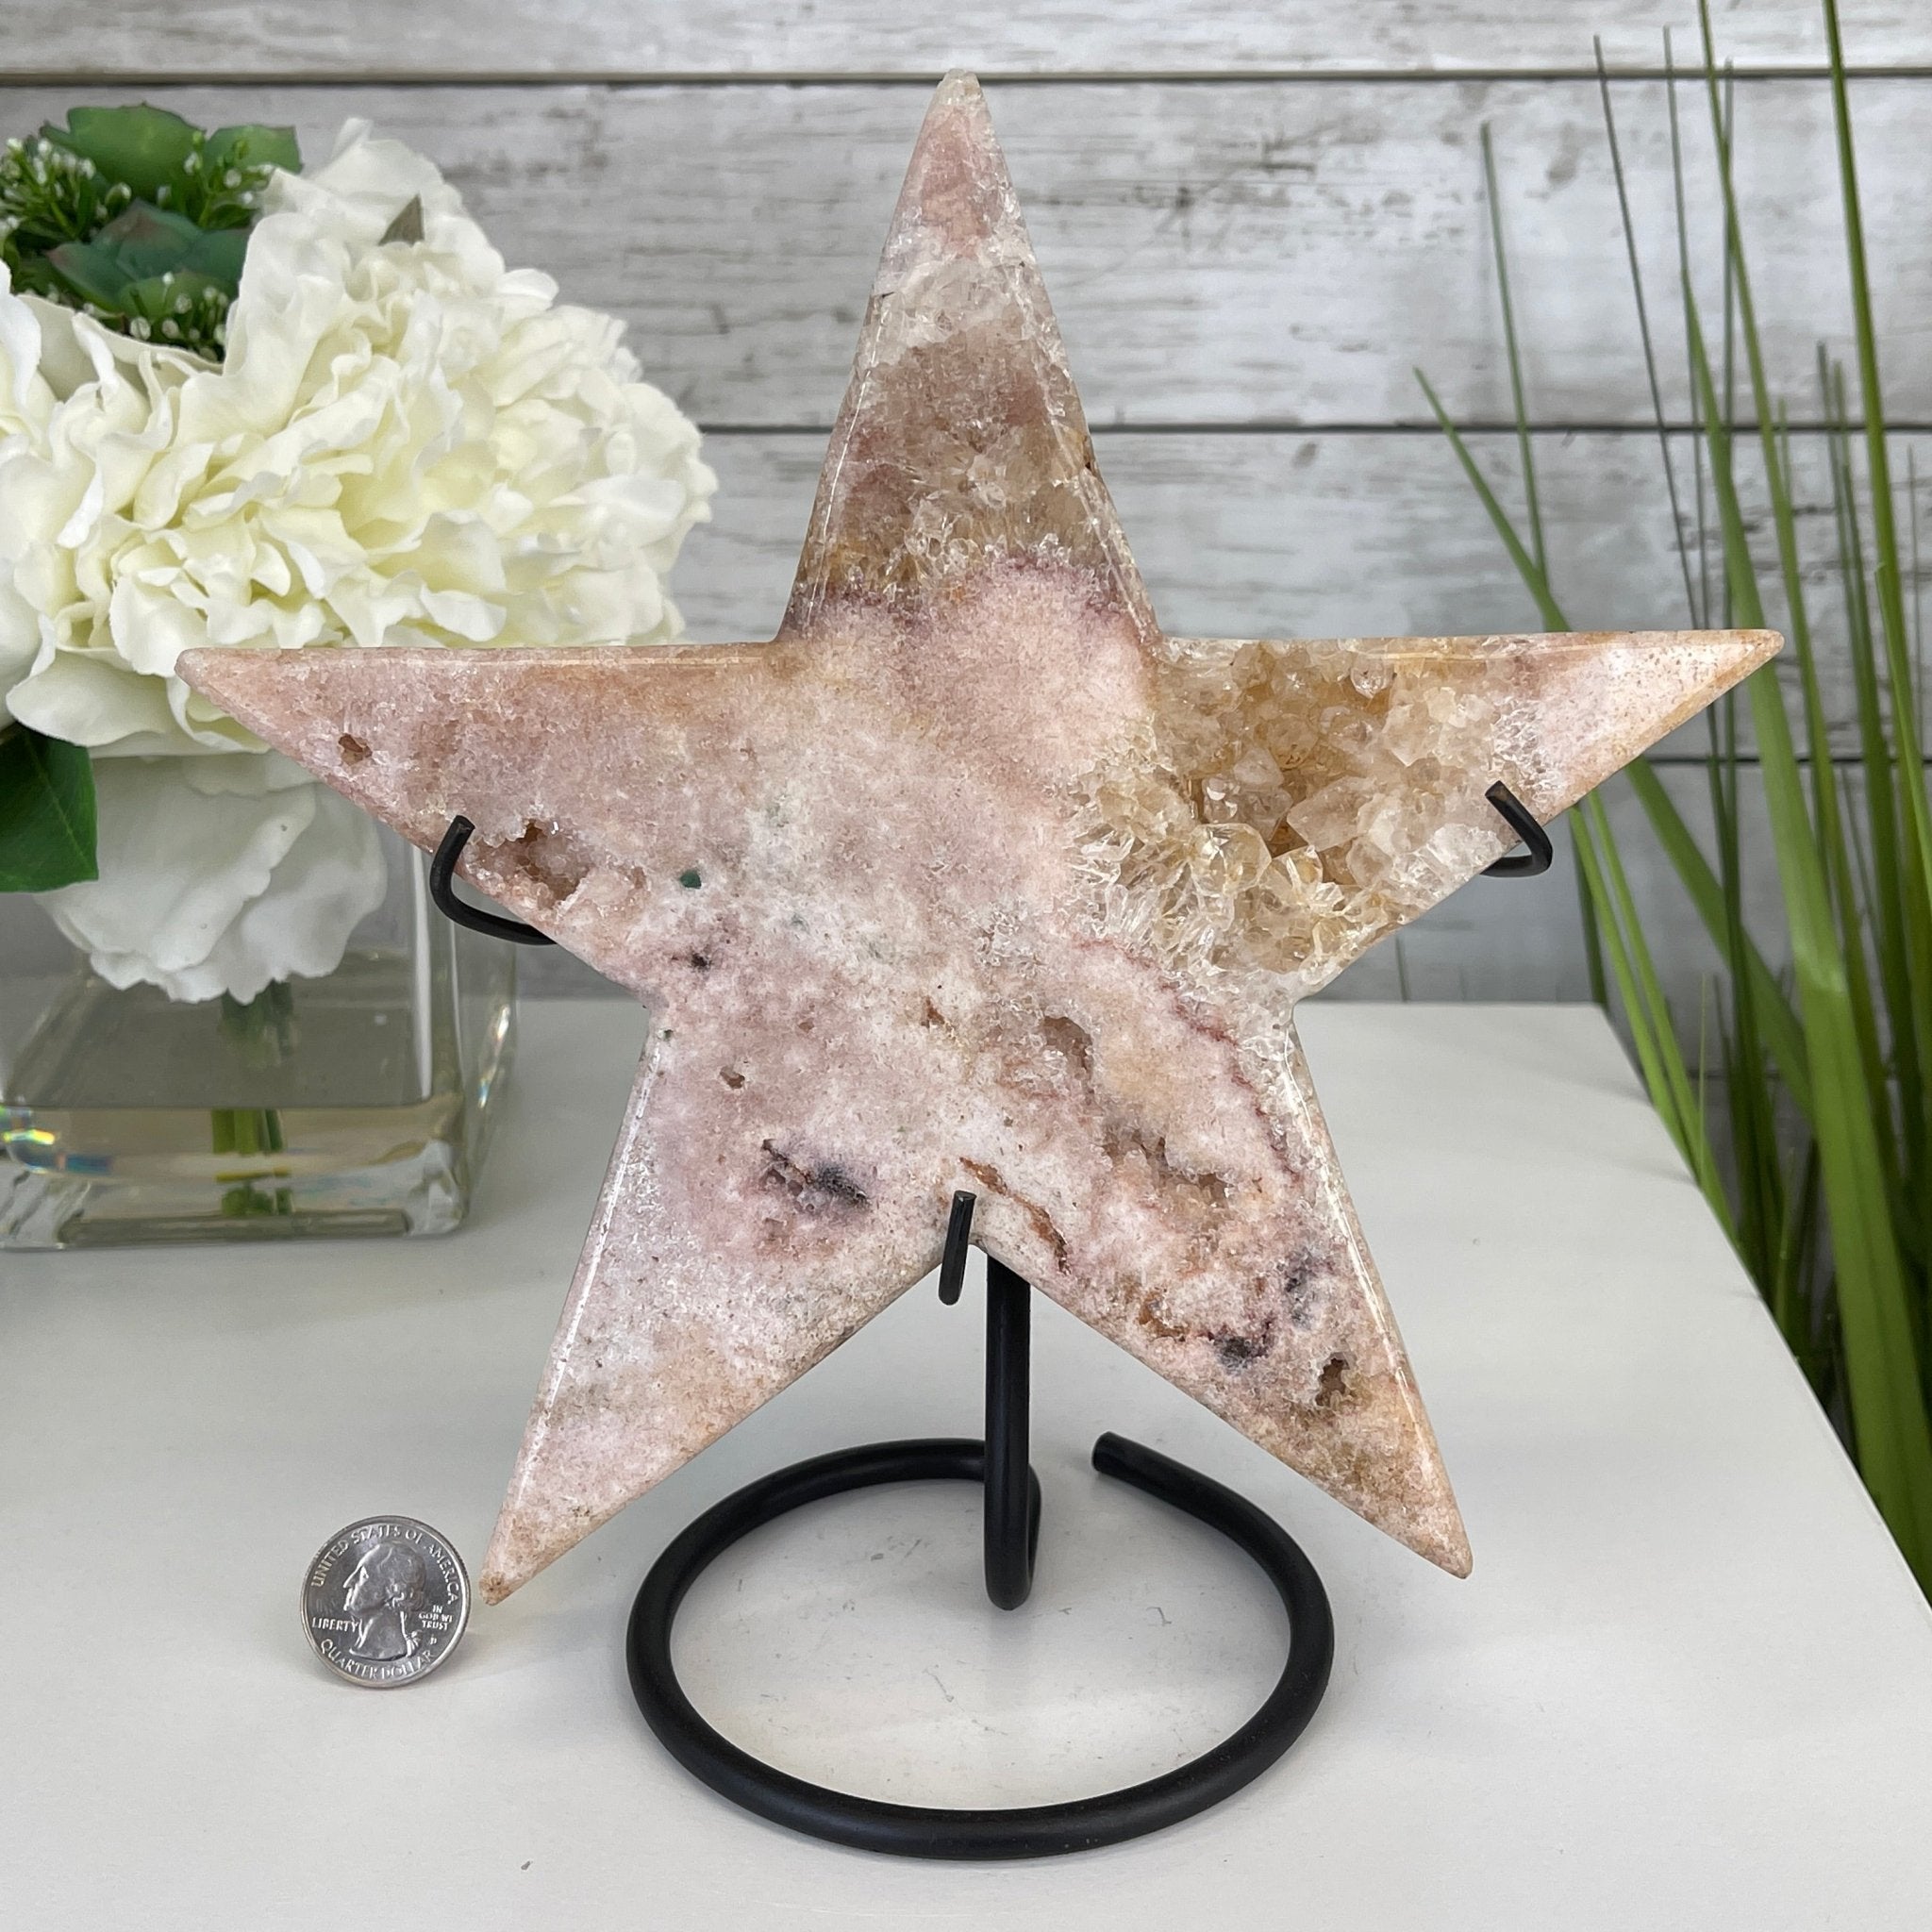 Pink Amethyst Star on a Metal Stand 9" Tall #5746-0021 by Brazil Gems - Brazil GemsBrazil GemsPink Amethyst Star on a Metal Stand 9" Tall #5746-0021 by Brazil GemsStars5746-0021